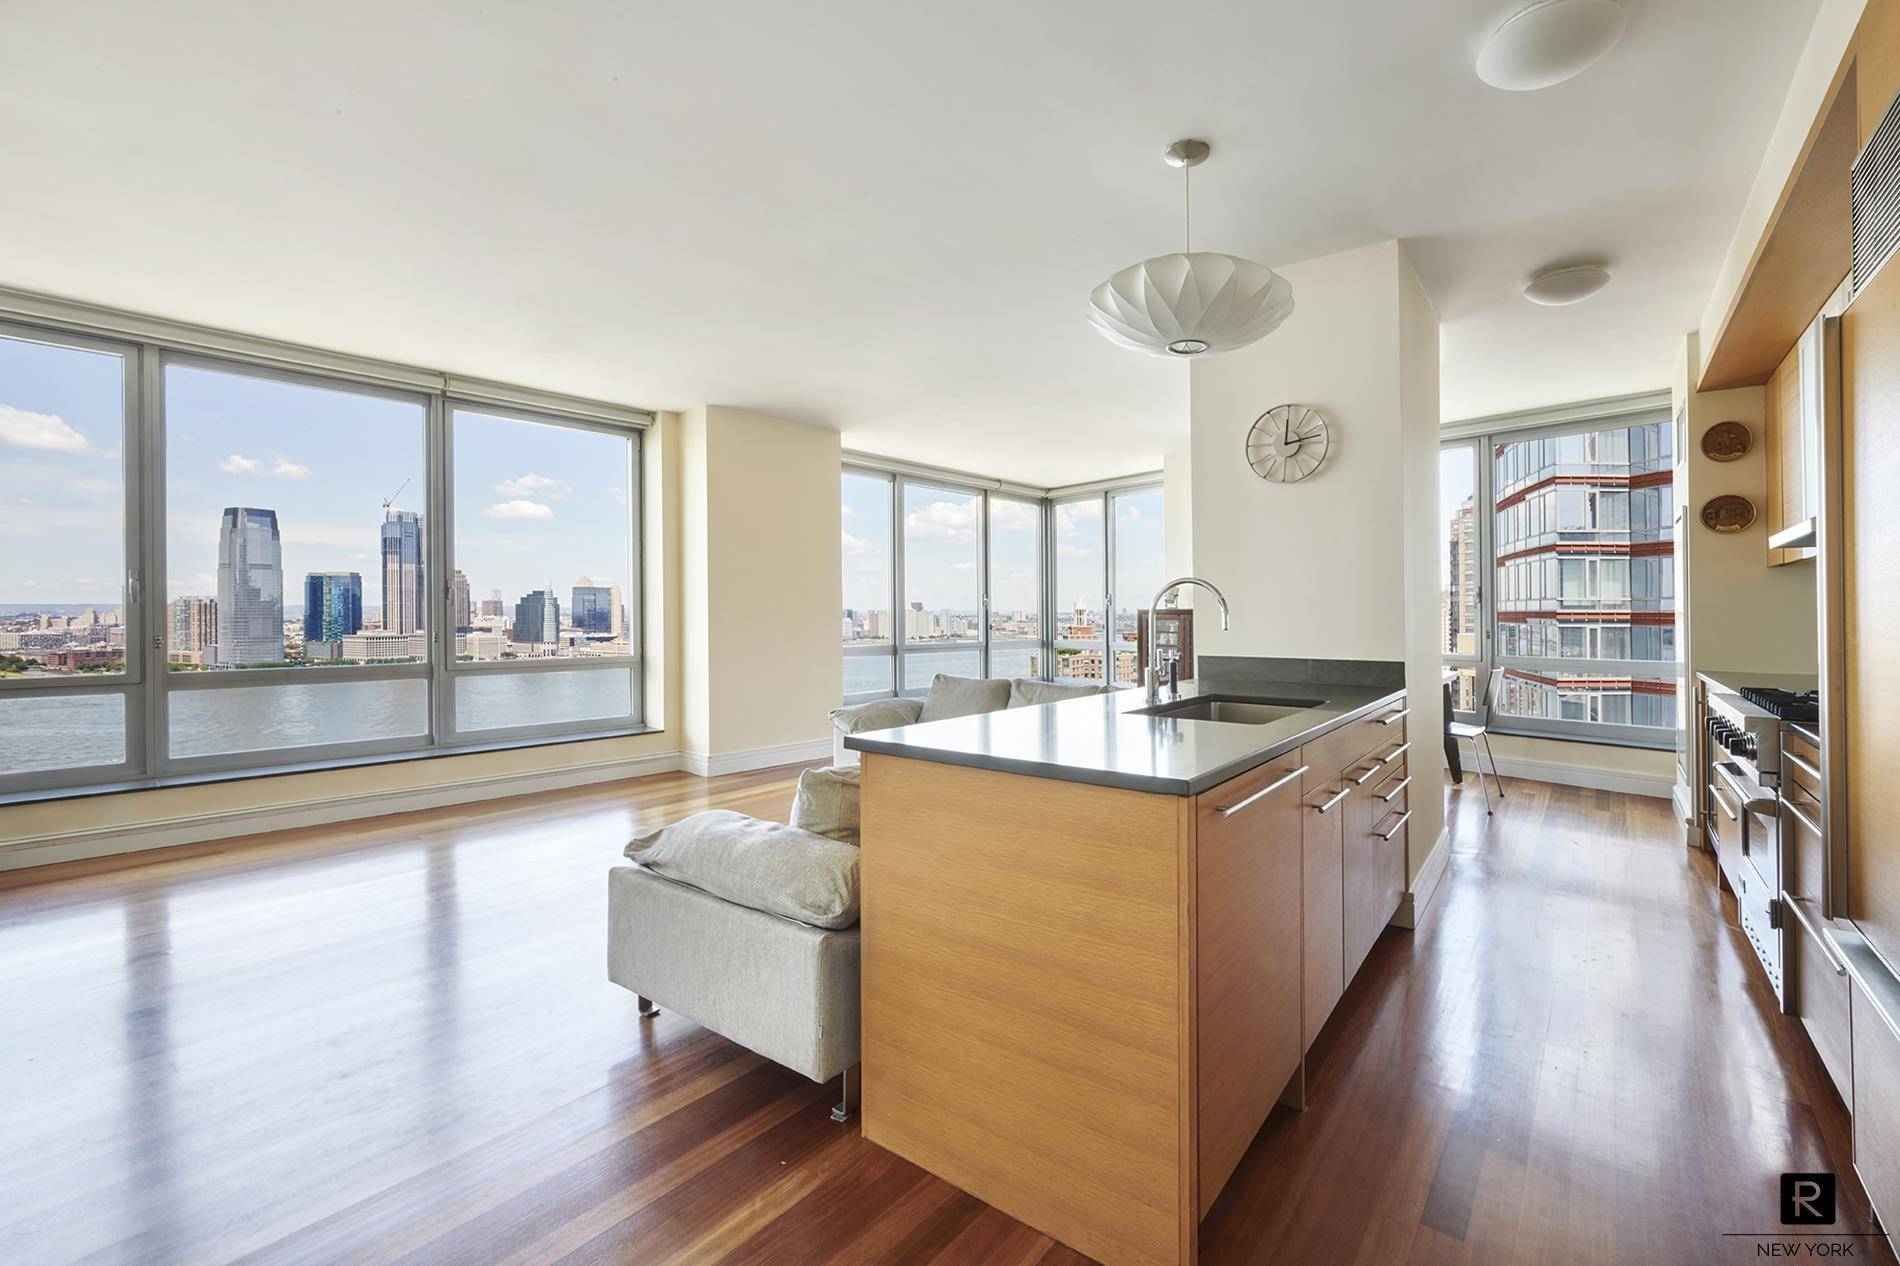 This spectacular 3 bedroom, 3 bathroom corner unit apartment is now available at Millennium Tower Residences.